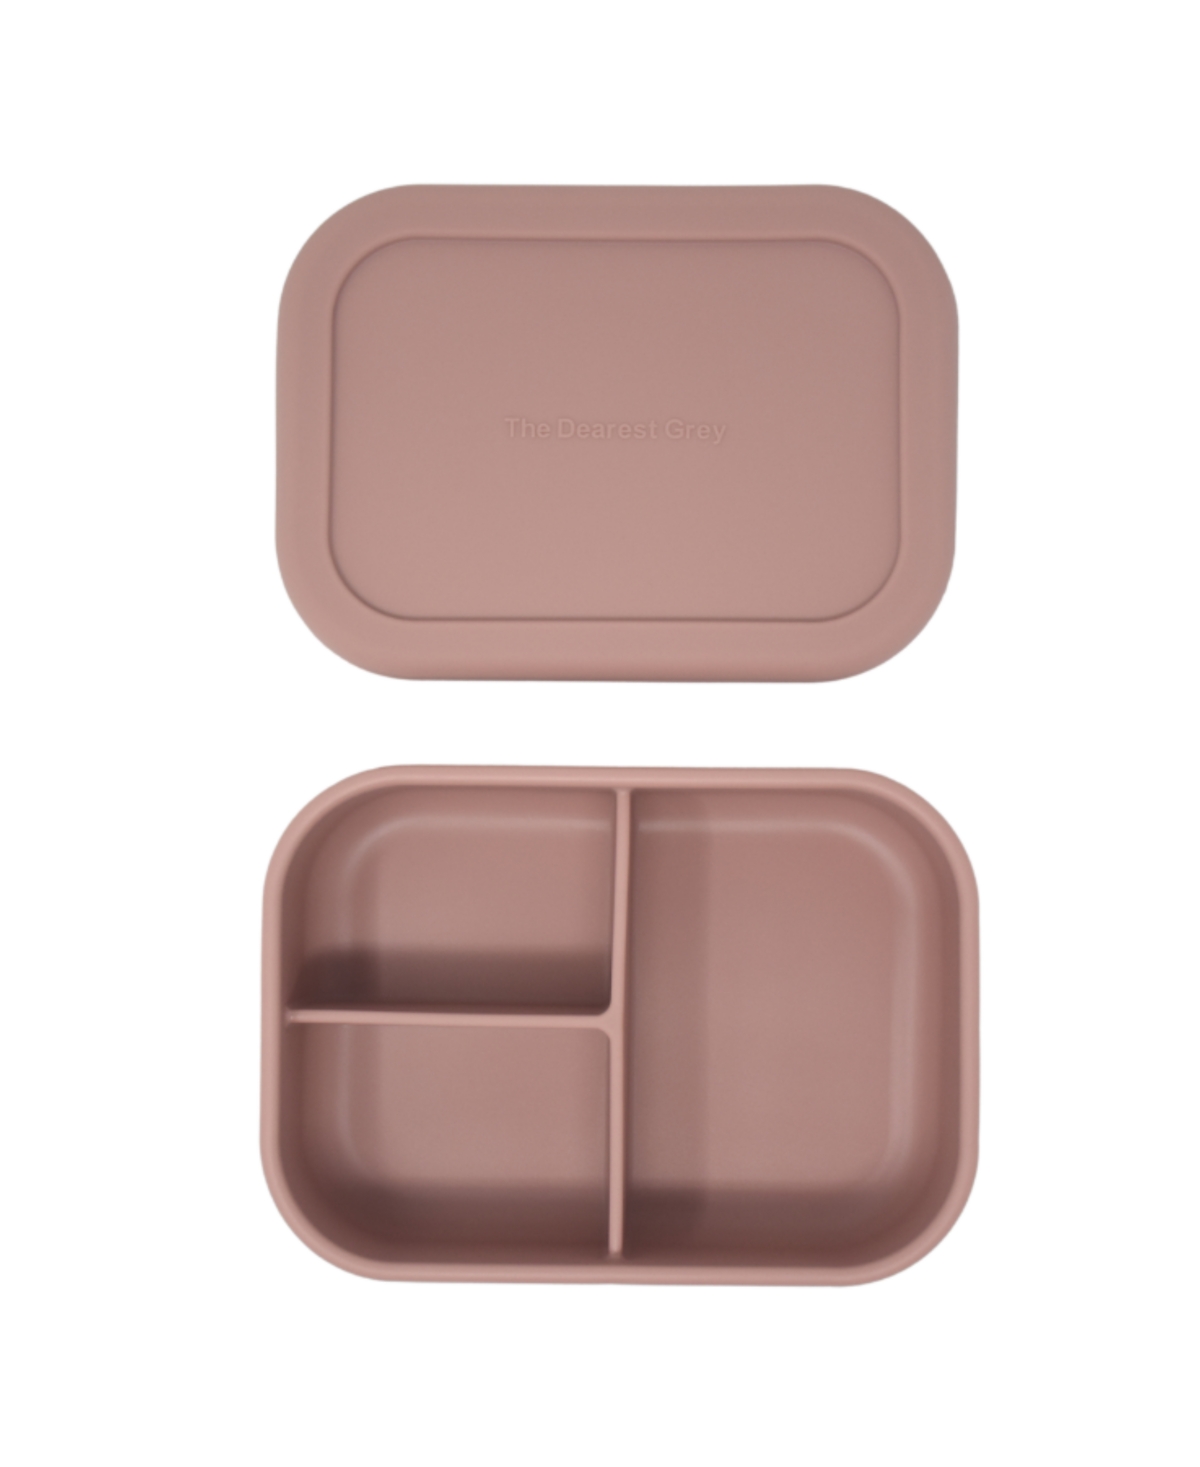 The Dearest Grey Silicone Bento Box In Rosewood